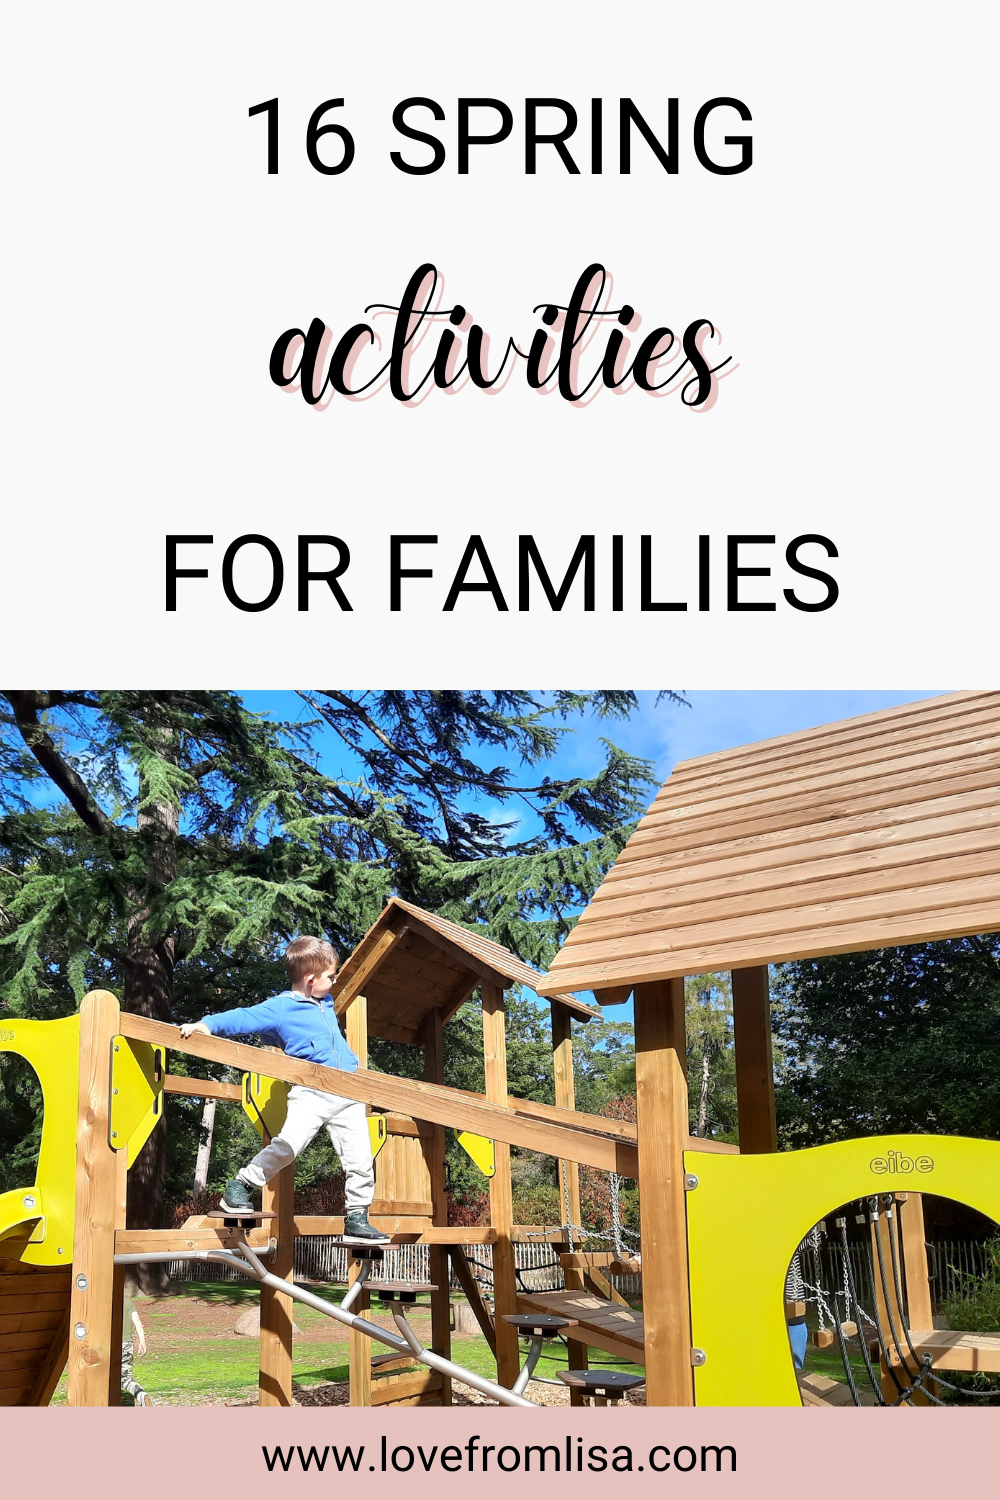 16 spring activities for families